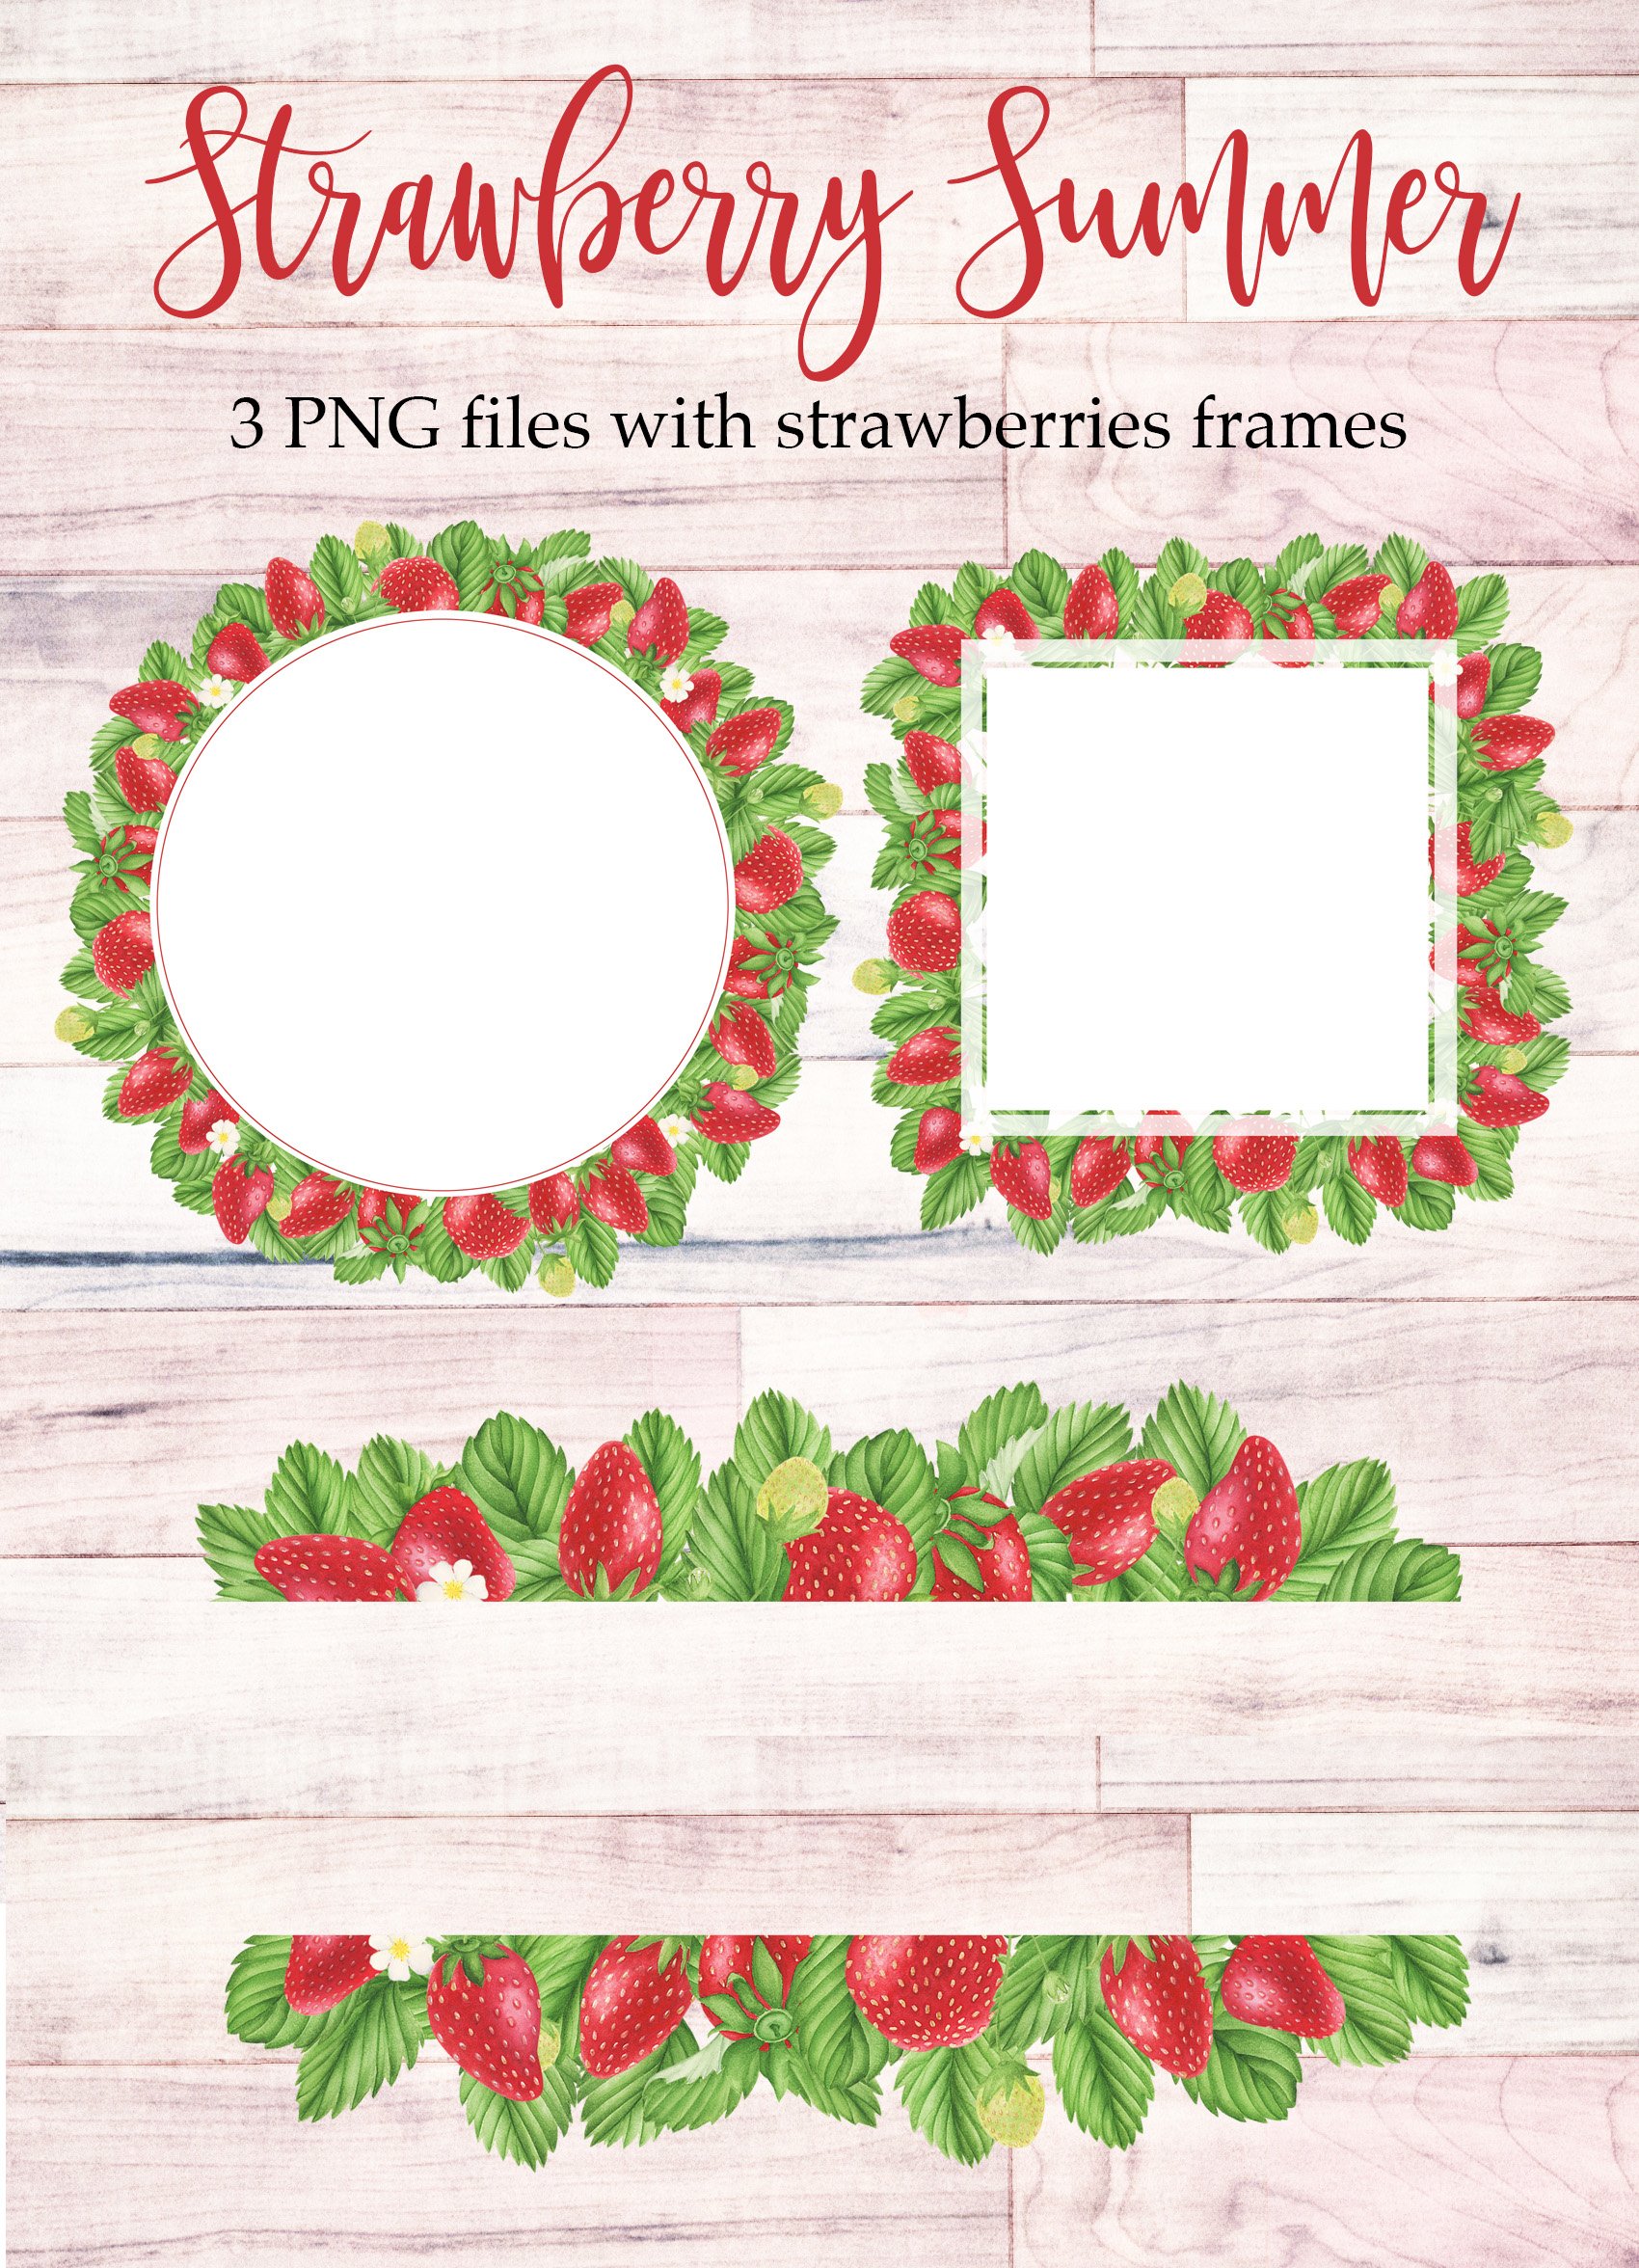 Three frames options with strawberries and leaves.